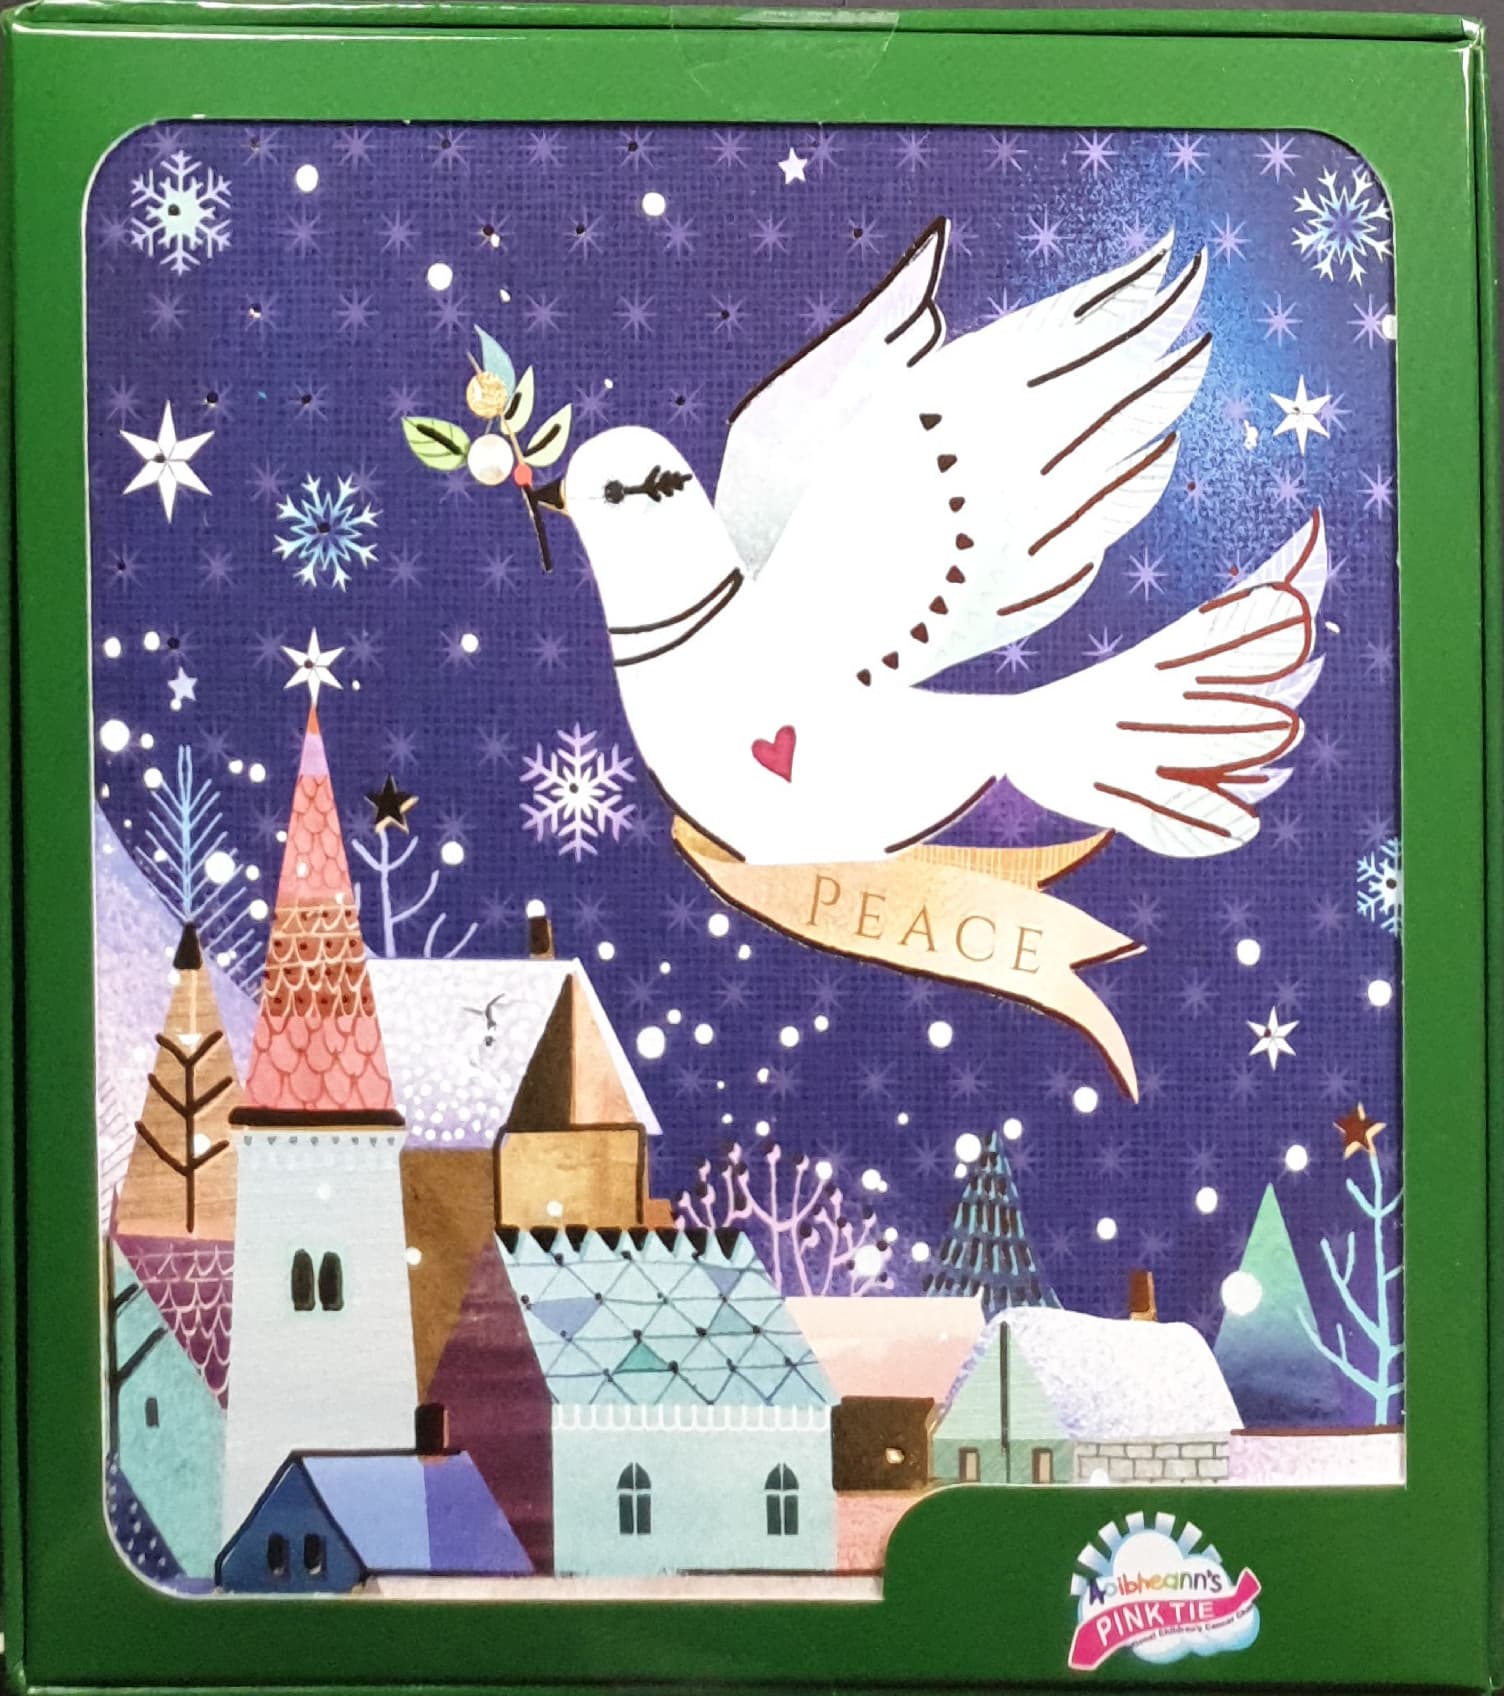 Charity Christmas Card (In Irish & English) - Box of 16 / Aoibheann's Pink Tie - Dove Flying over Houses